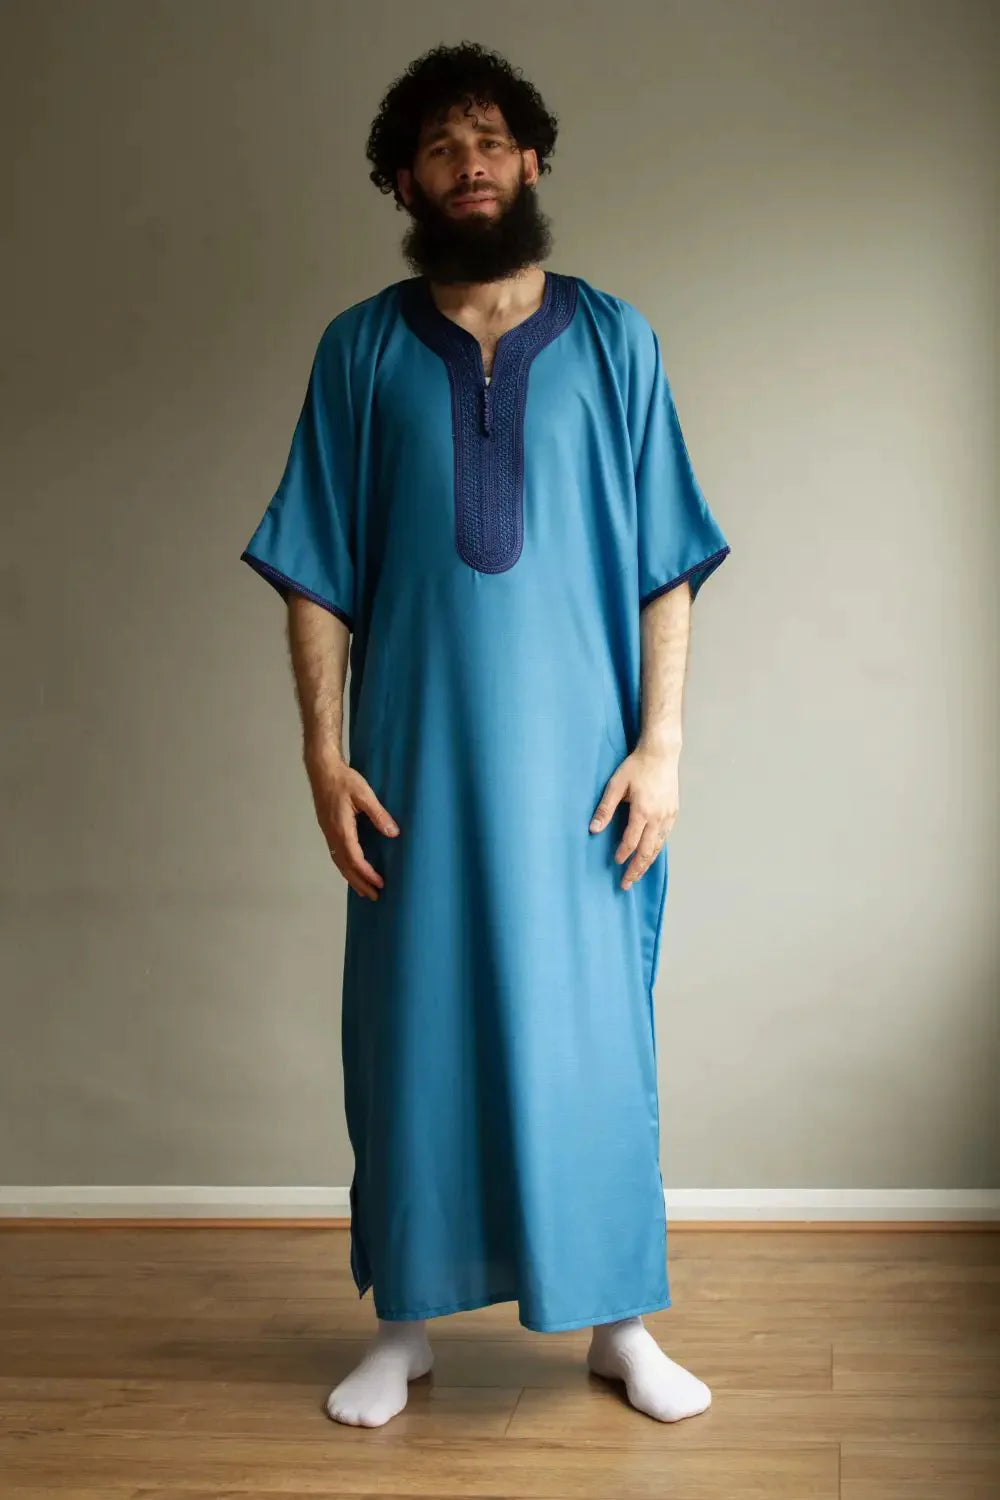 what people thinks about thobes in uk